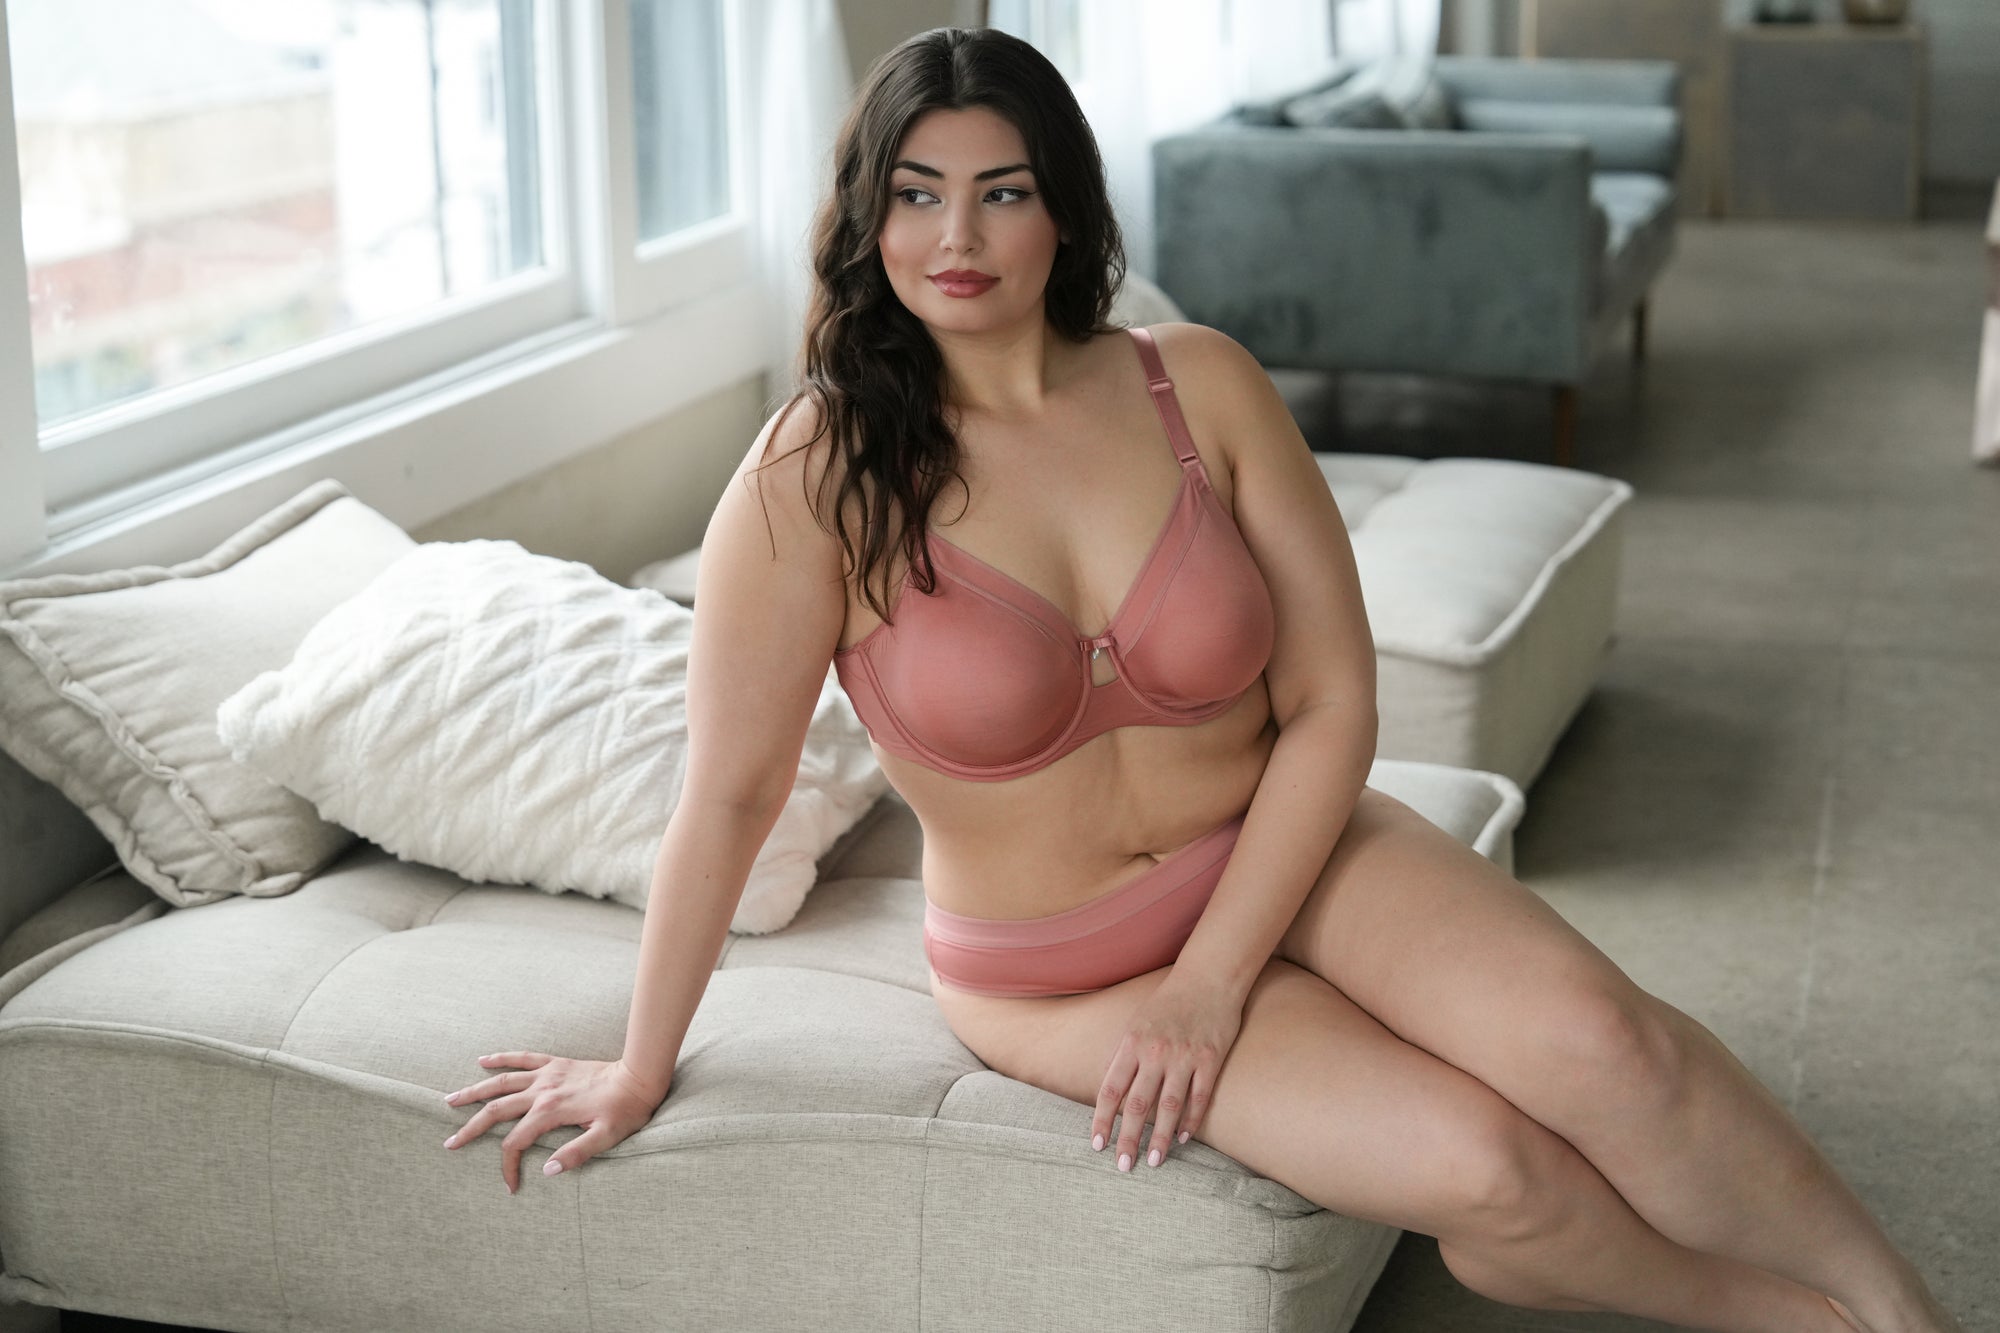 I was wearing the WRONG bra for years. Are you choosing the RIGHT